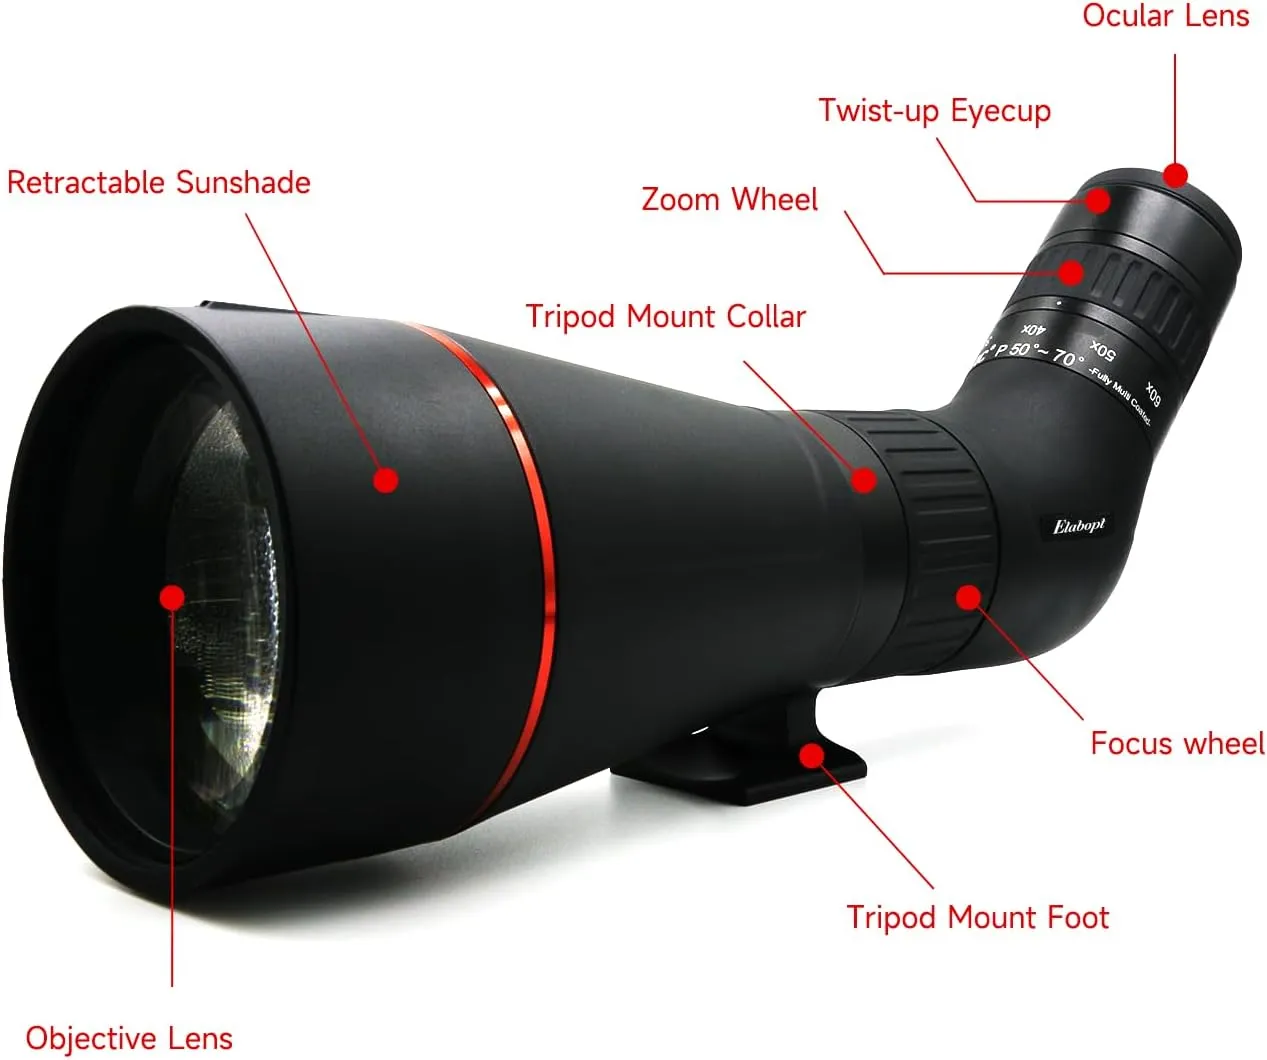 Givite 20-60x80ED Spotting Scope - Waterproof High Definition Spotter Scopes,Diamond White Coating for Wildlife Viewing and Other Outdoor Activities